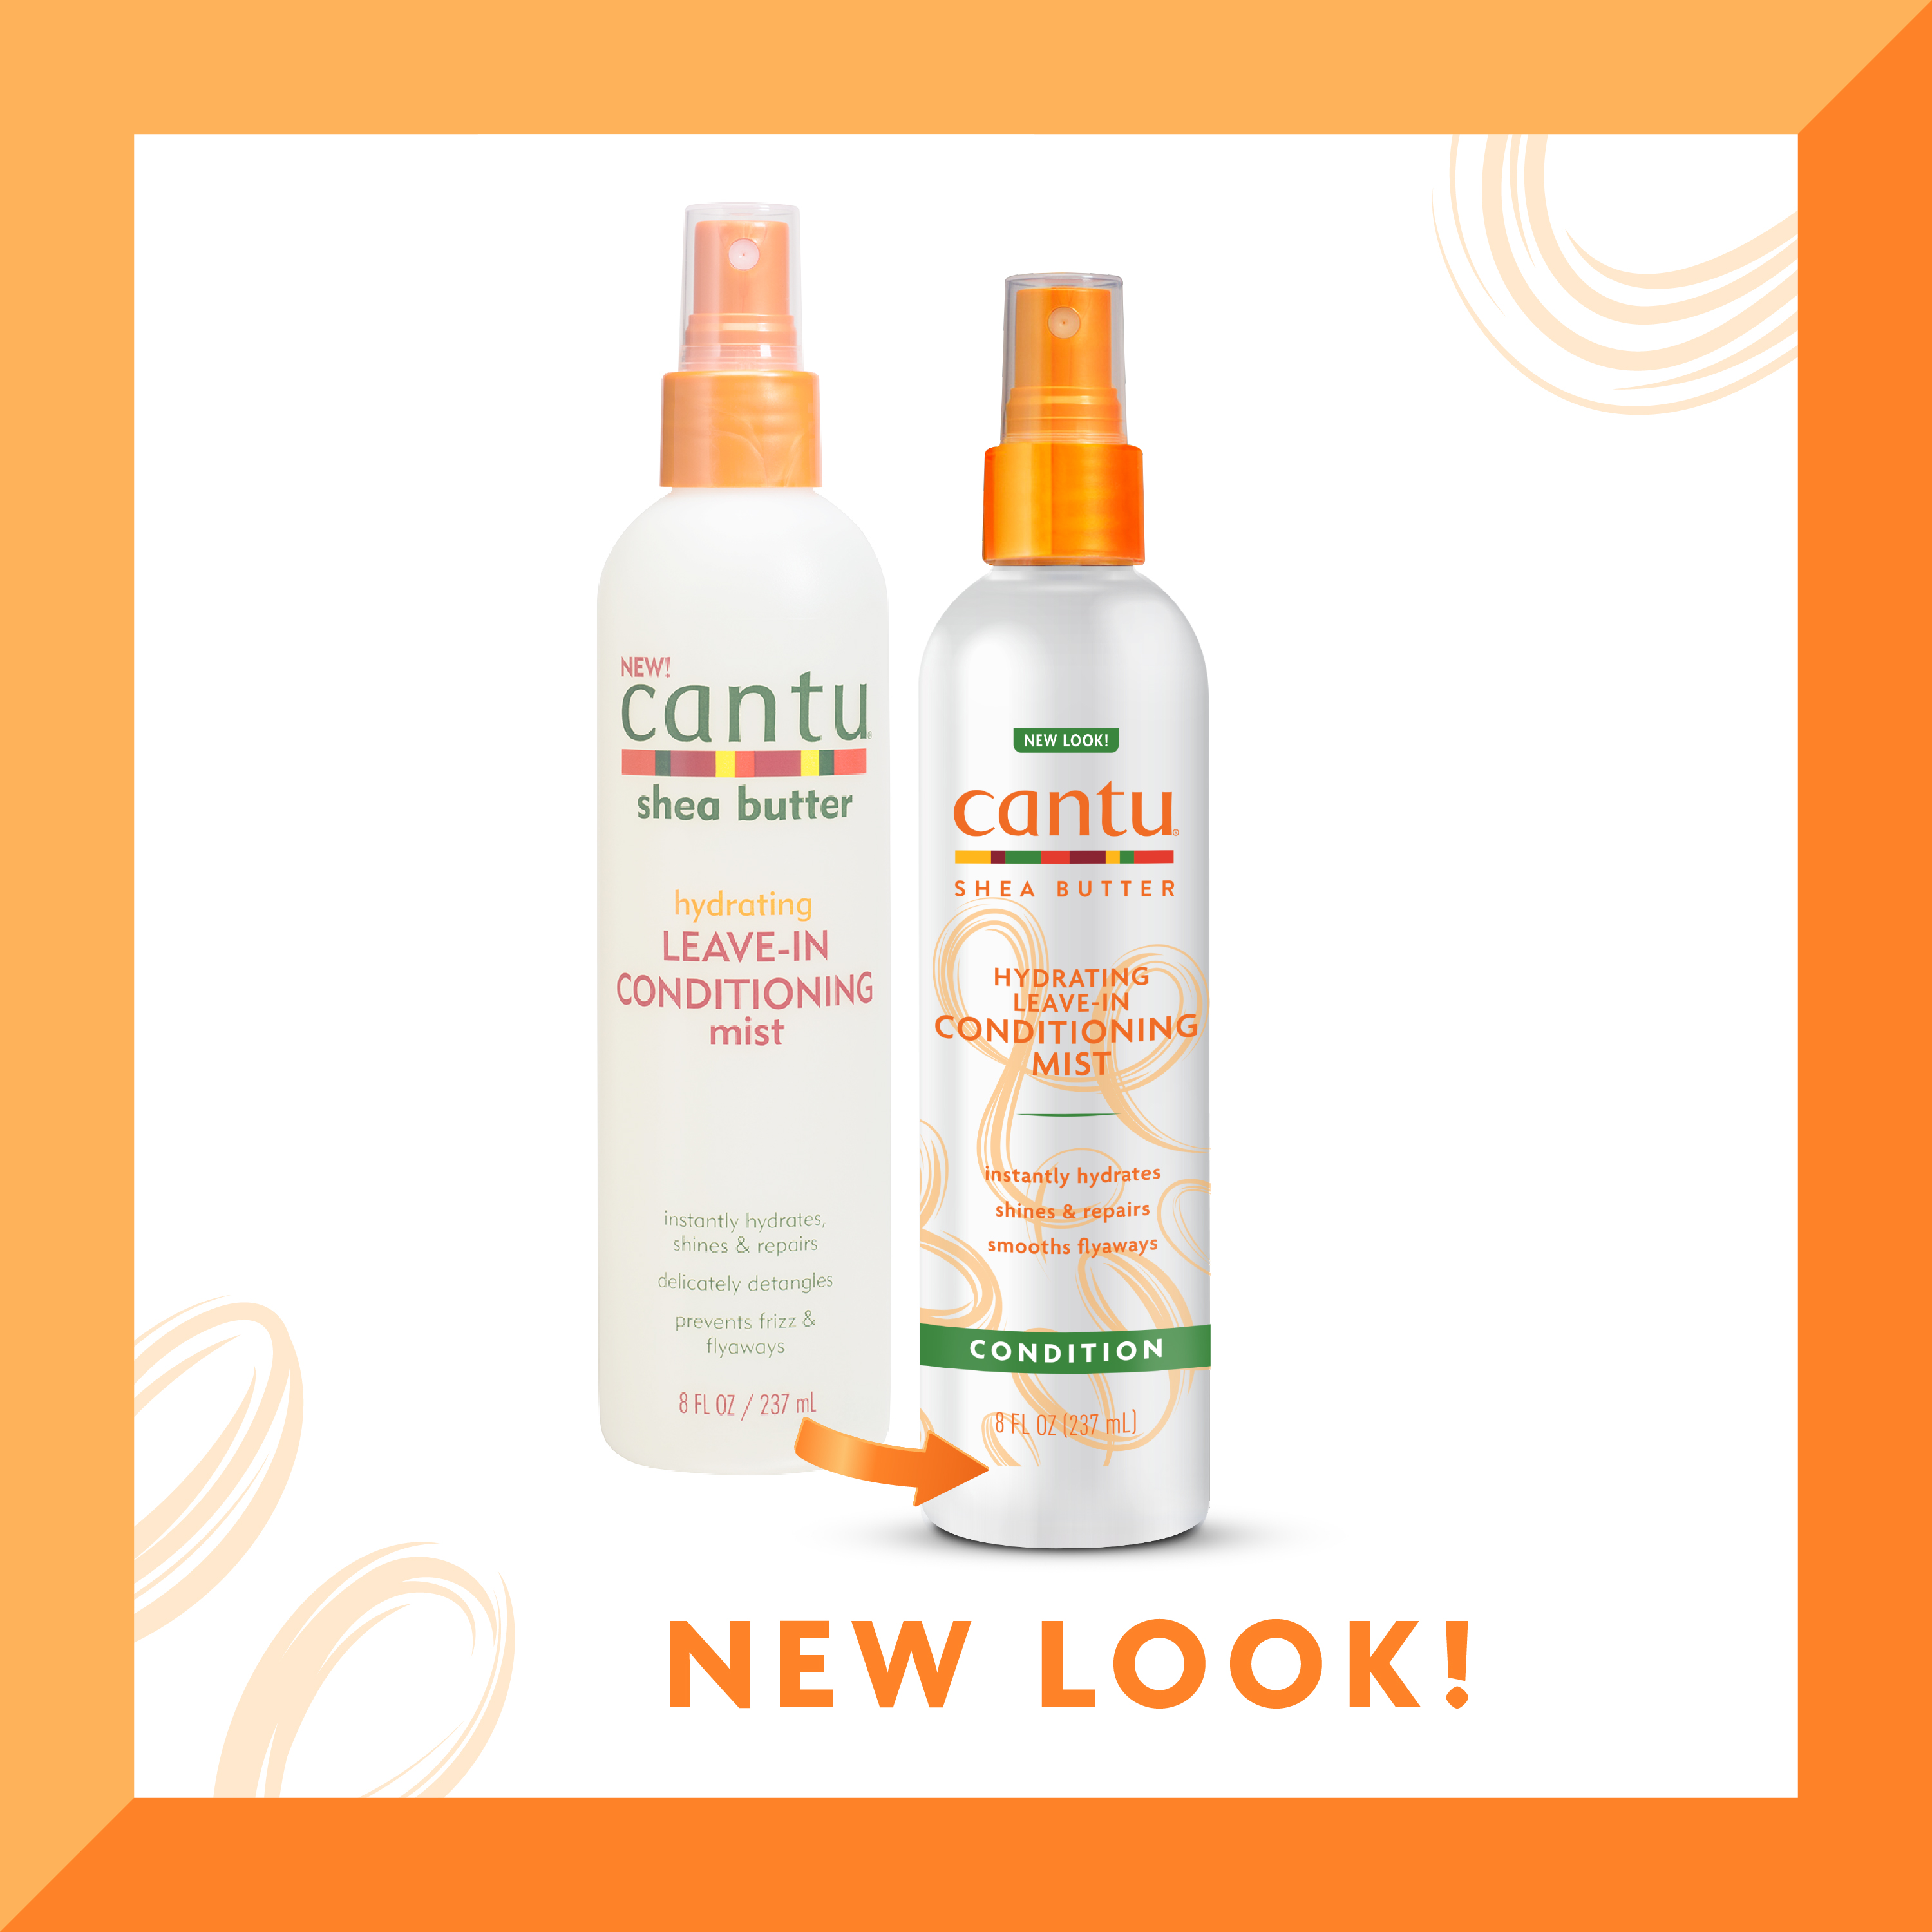 Cantu Shea Butter Leave-in Conditioning Mist with Castor & Argan Oil, 8 fl oz - image 2 of 14